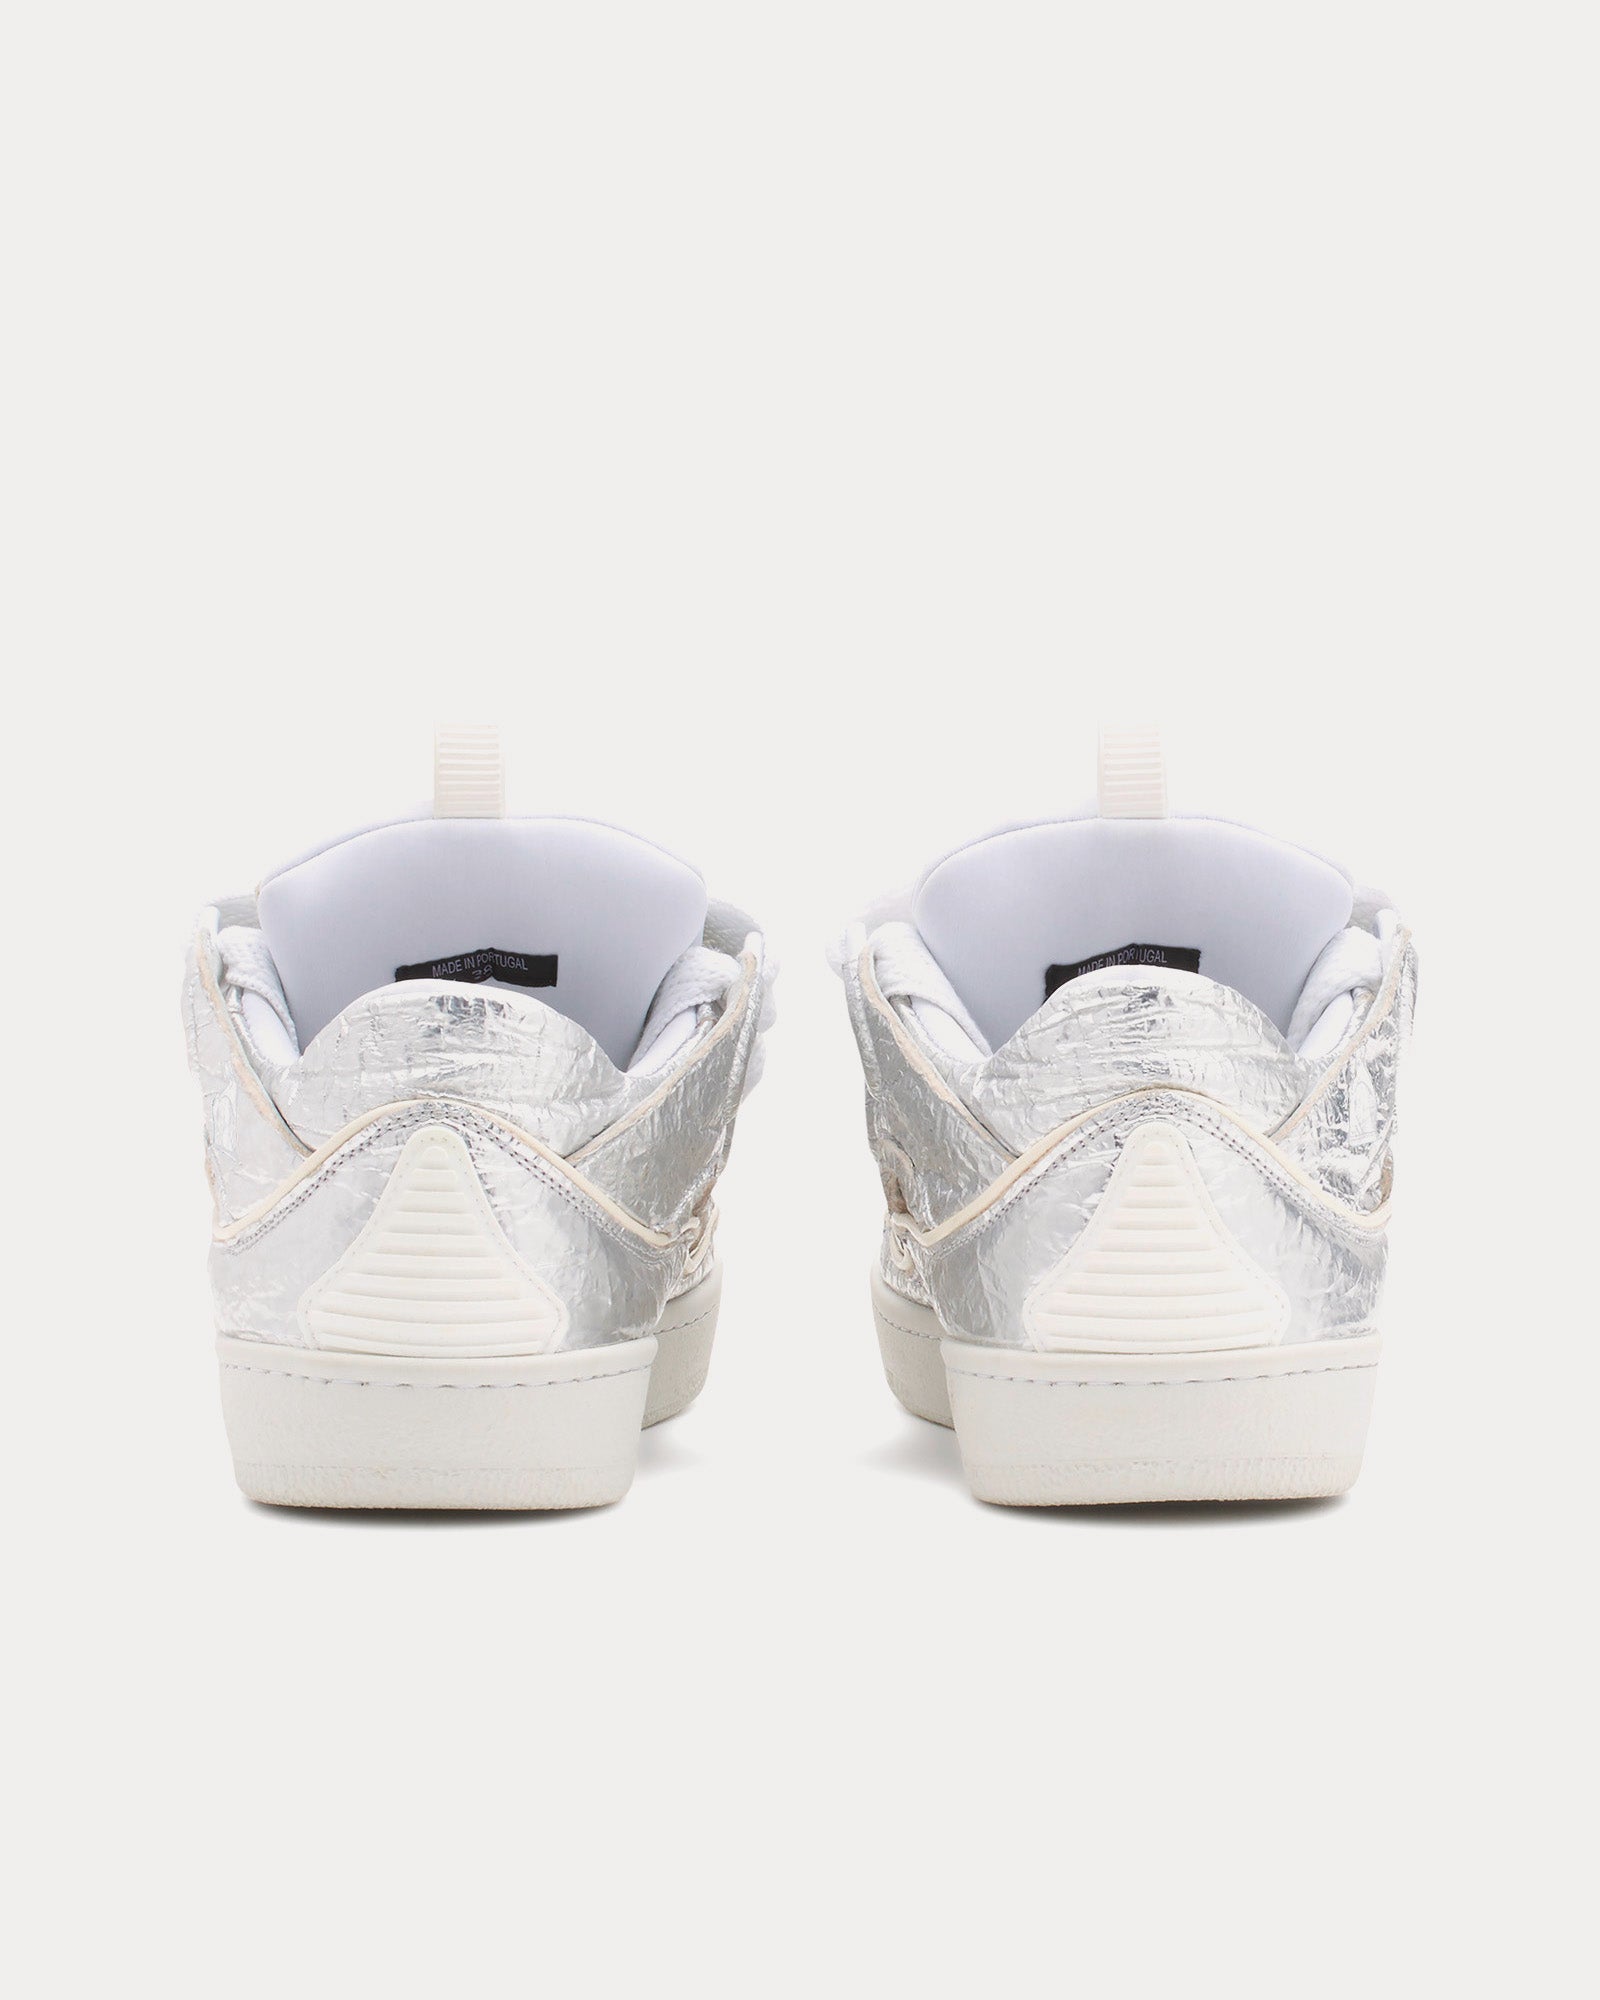 Lanvin - Curb Crinkled Metallic Leather Silver Low Top Sneakers